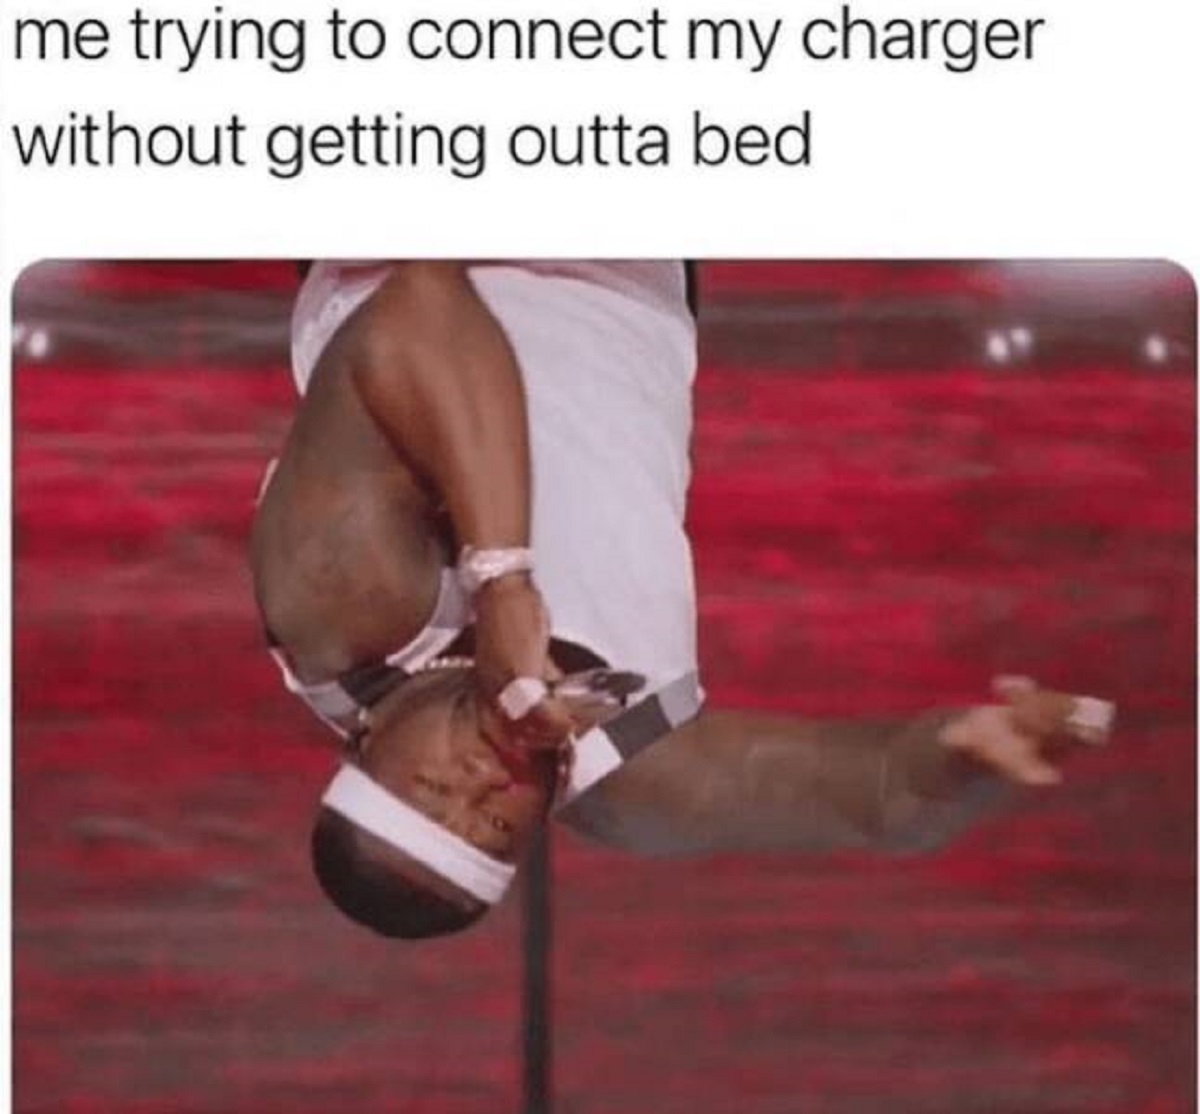 50 cent at superbowl - me trying to connect my charger without getting outta bed